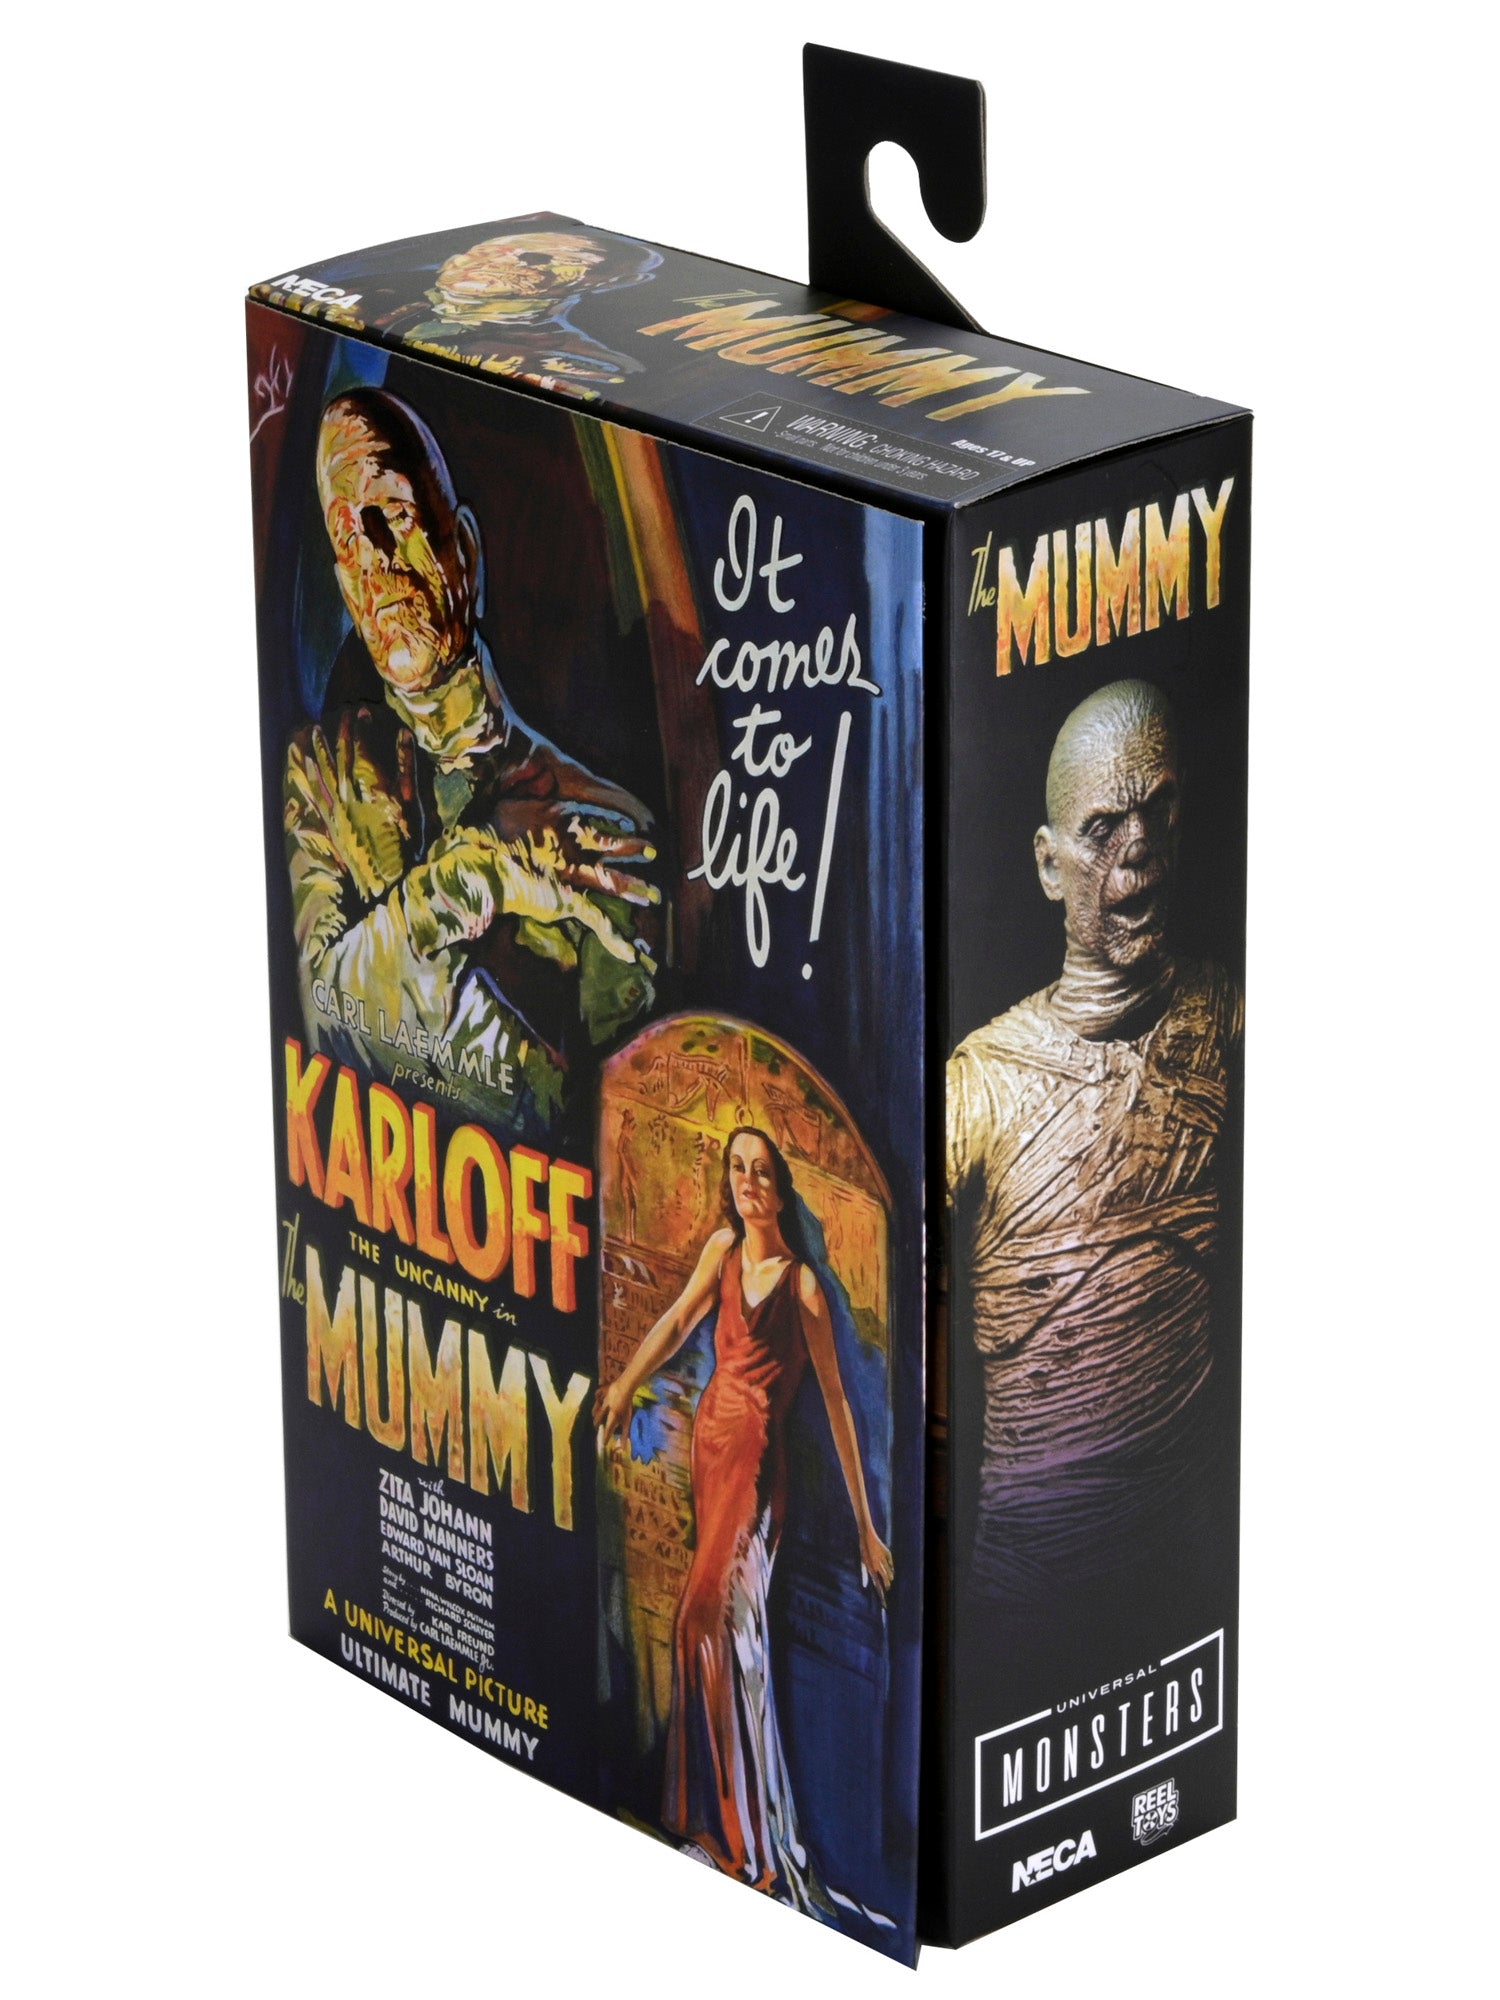 NECA - Universal Monsters - 7" Scale Action Figure - Ultimate Mummy (Color) - costumes.com